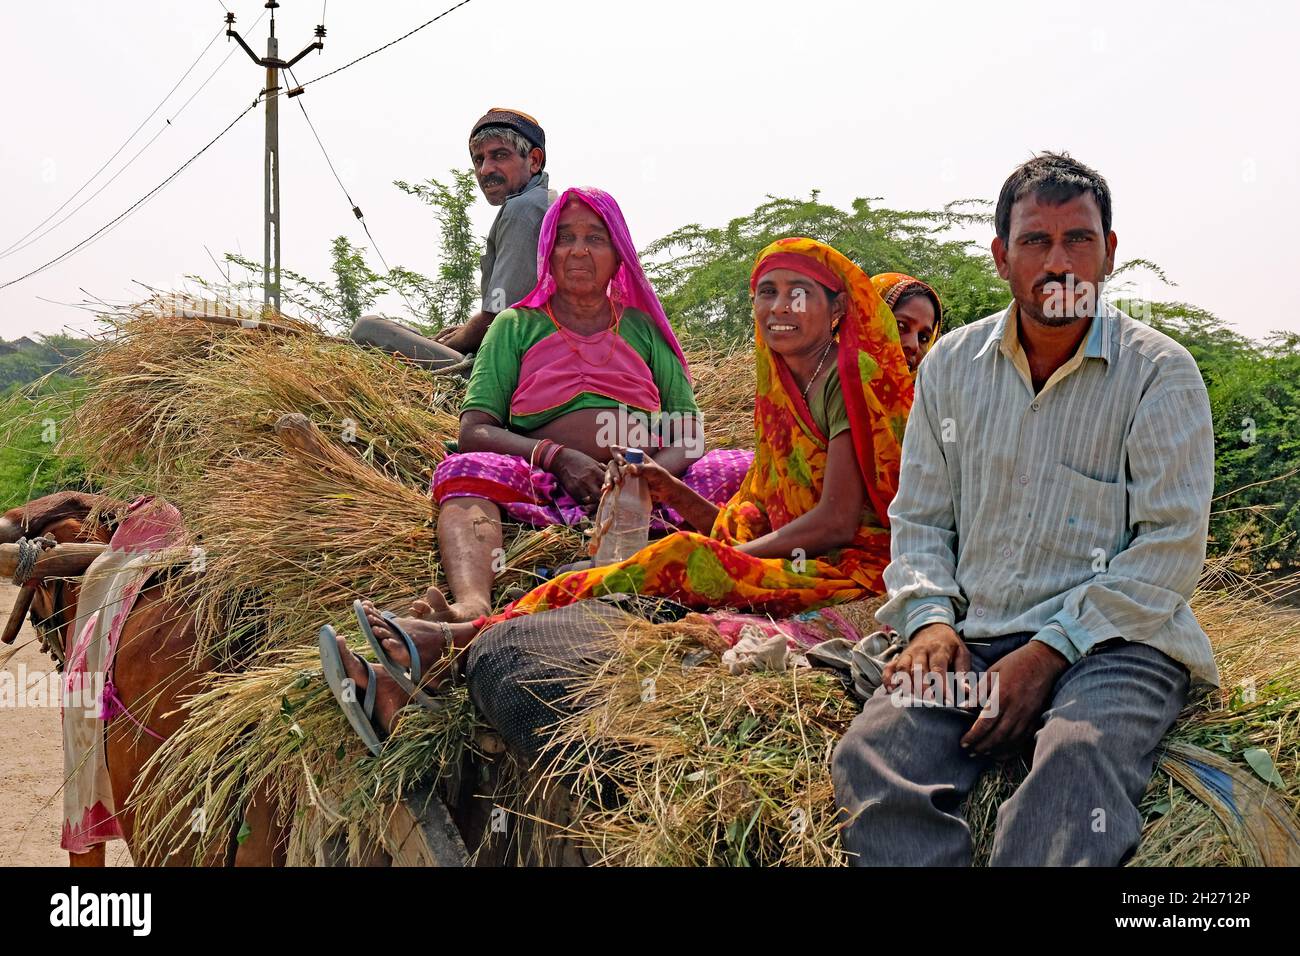 Gujarat, India - October 30, 2016: Family members returning home at the end of a day spent harvesting on their smallholding Stock Photo